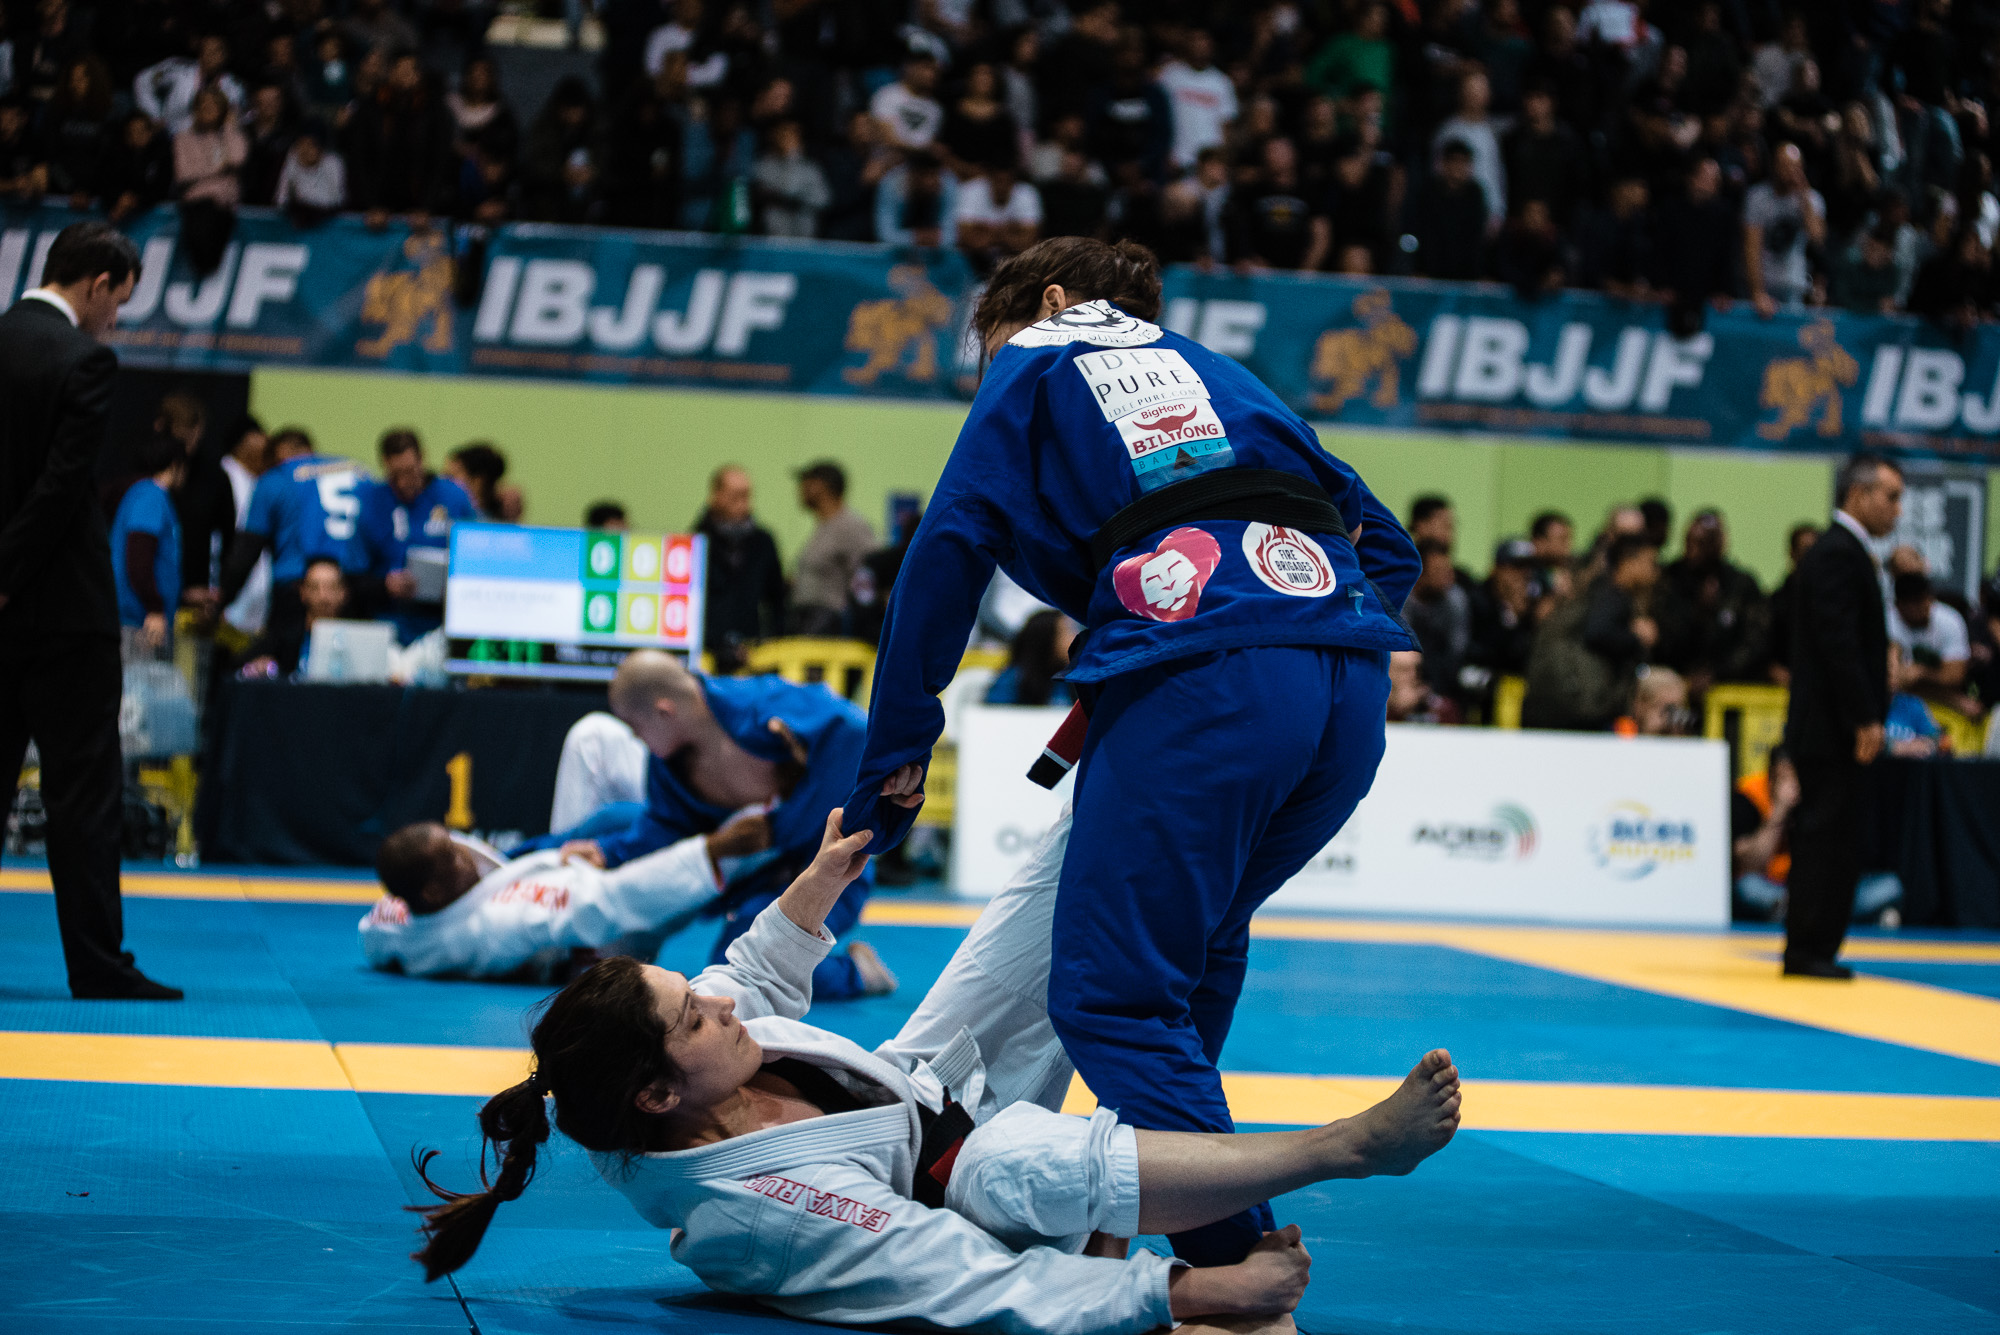 Ready to compete? Here is a guide to the BJJ tournament scene